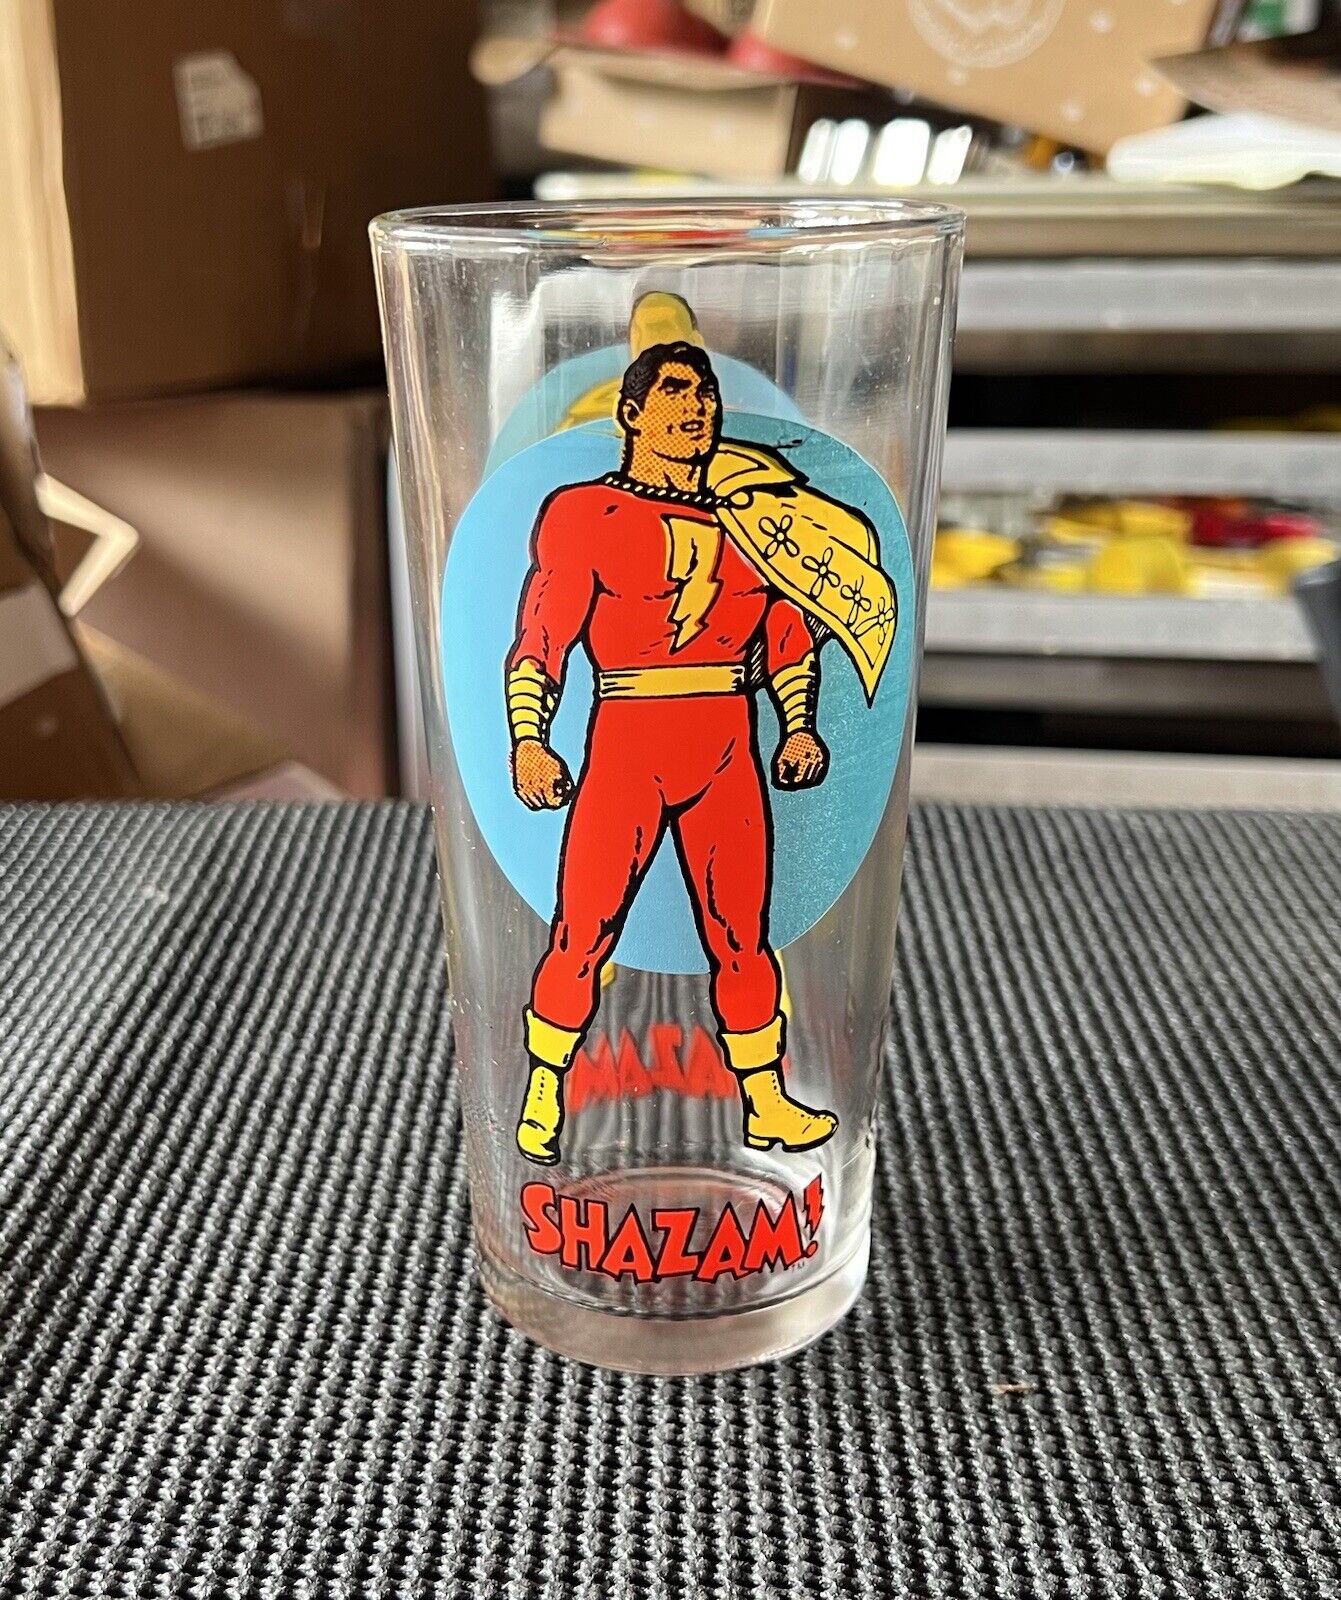 1976 VINTAGE Shazam Burger King Promotional Moon Glass Great Condition